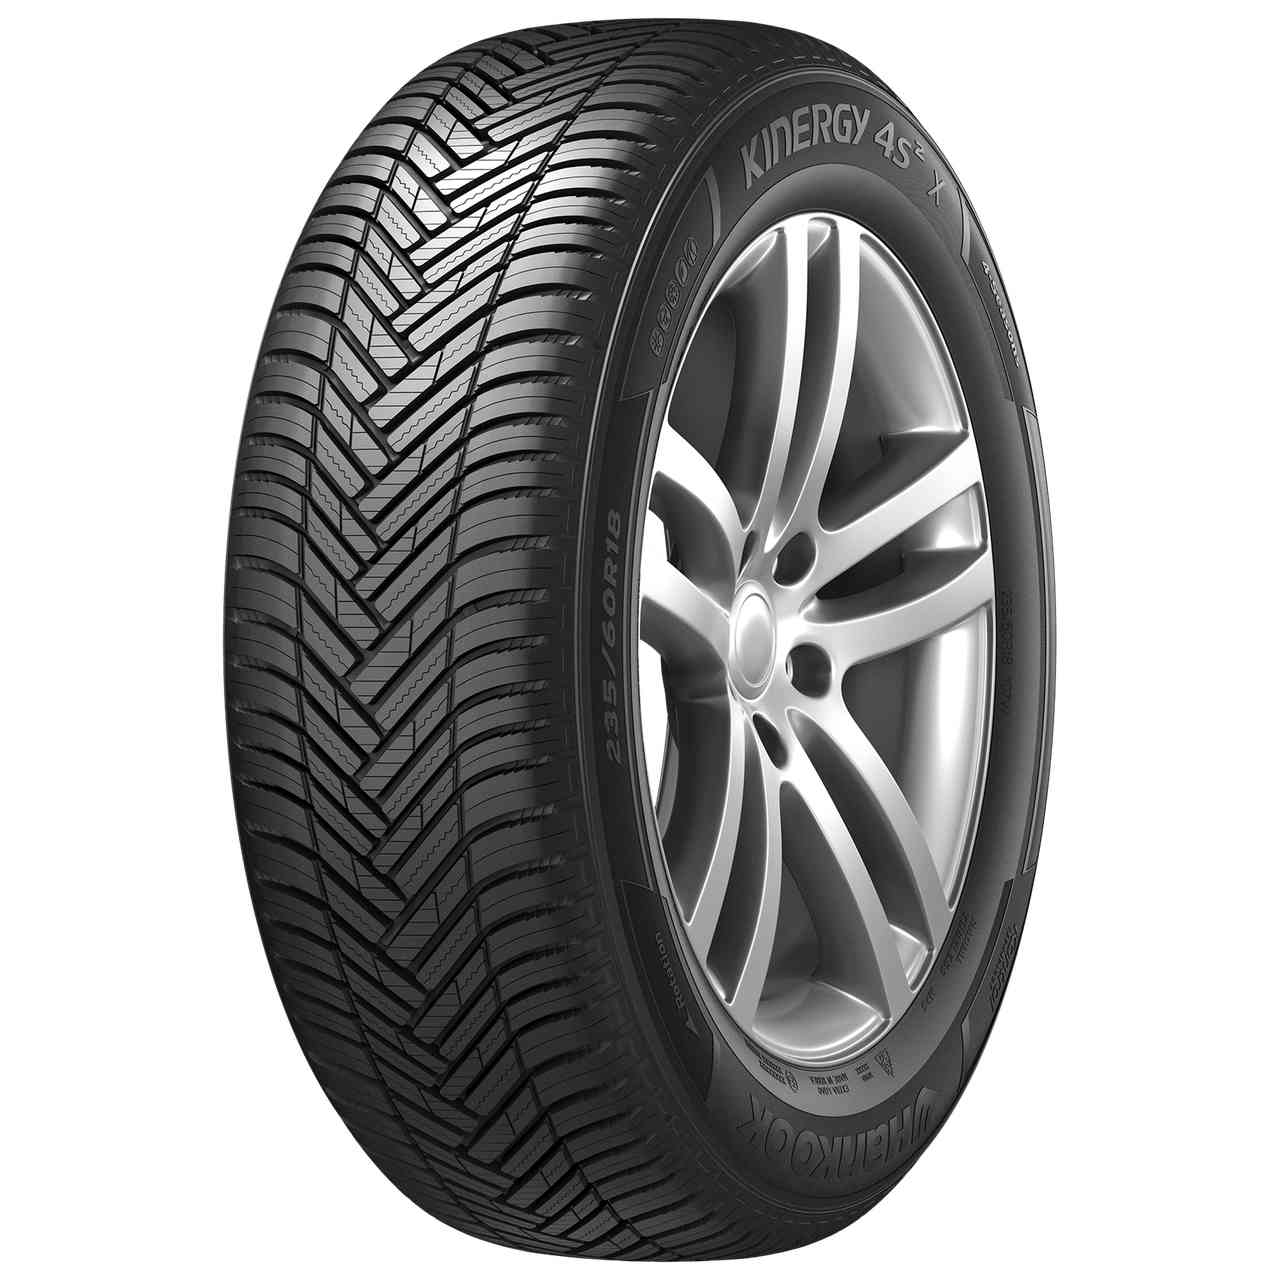 HANKOOK KINERGY 4S 2 X (H750A) 255/55R18 109V BSW XL